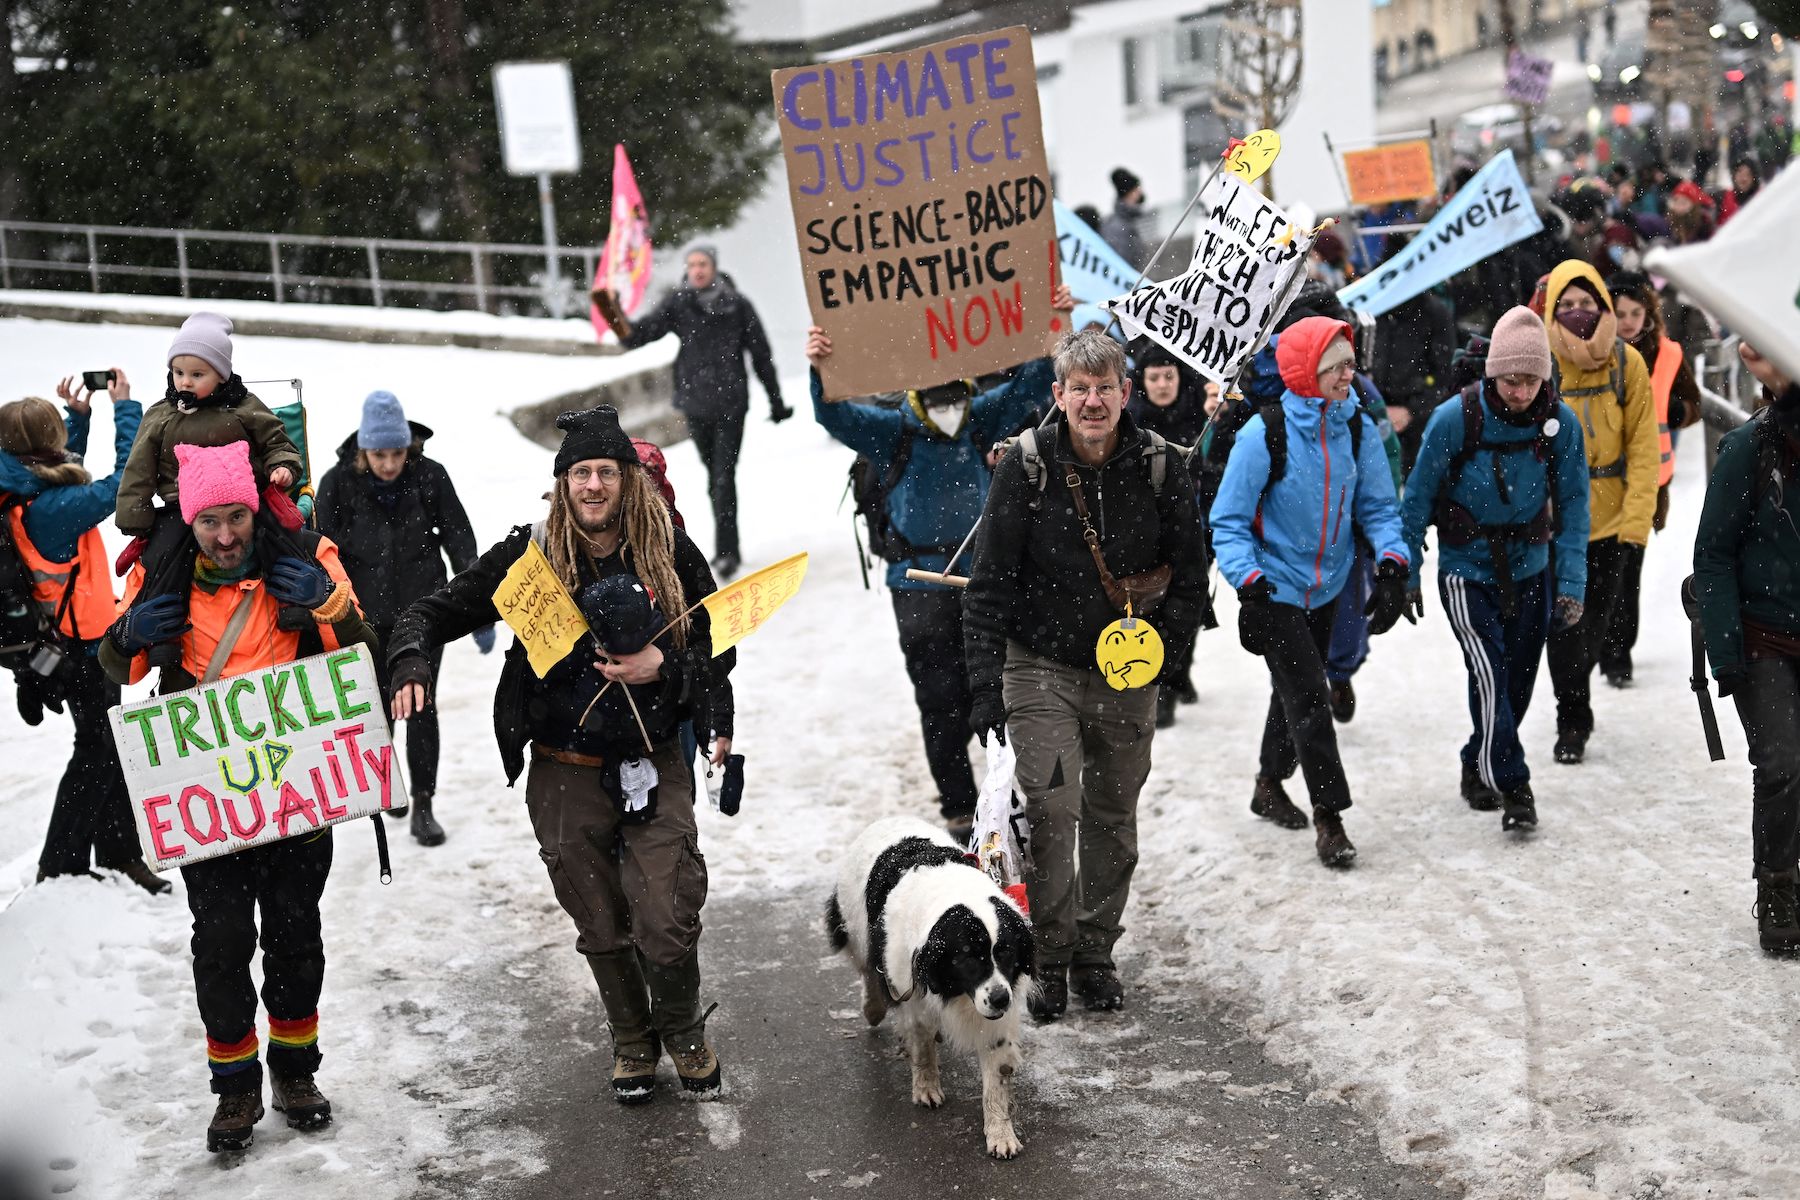 People In Switzerland Have Voted To Back Up Law To Cut Carbon Emissions